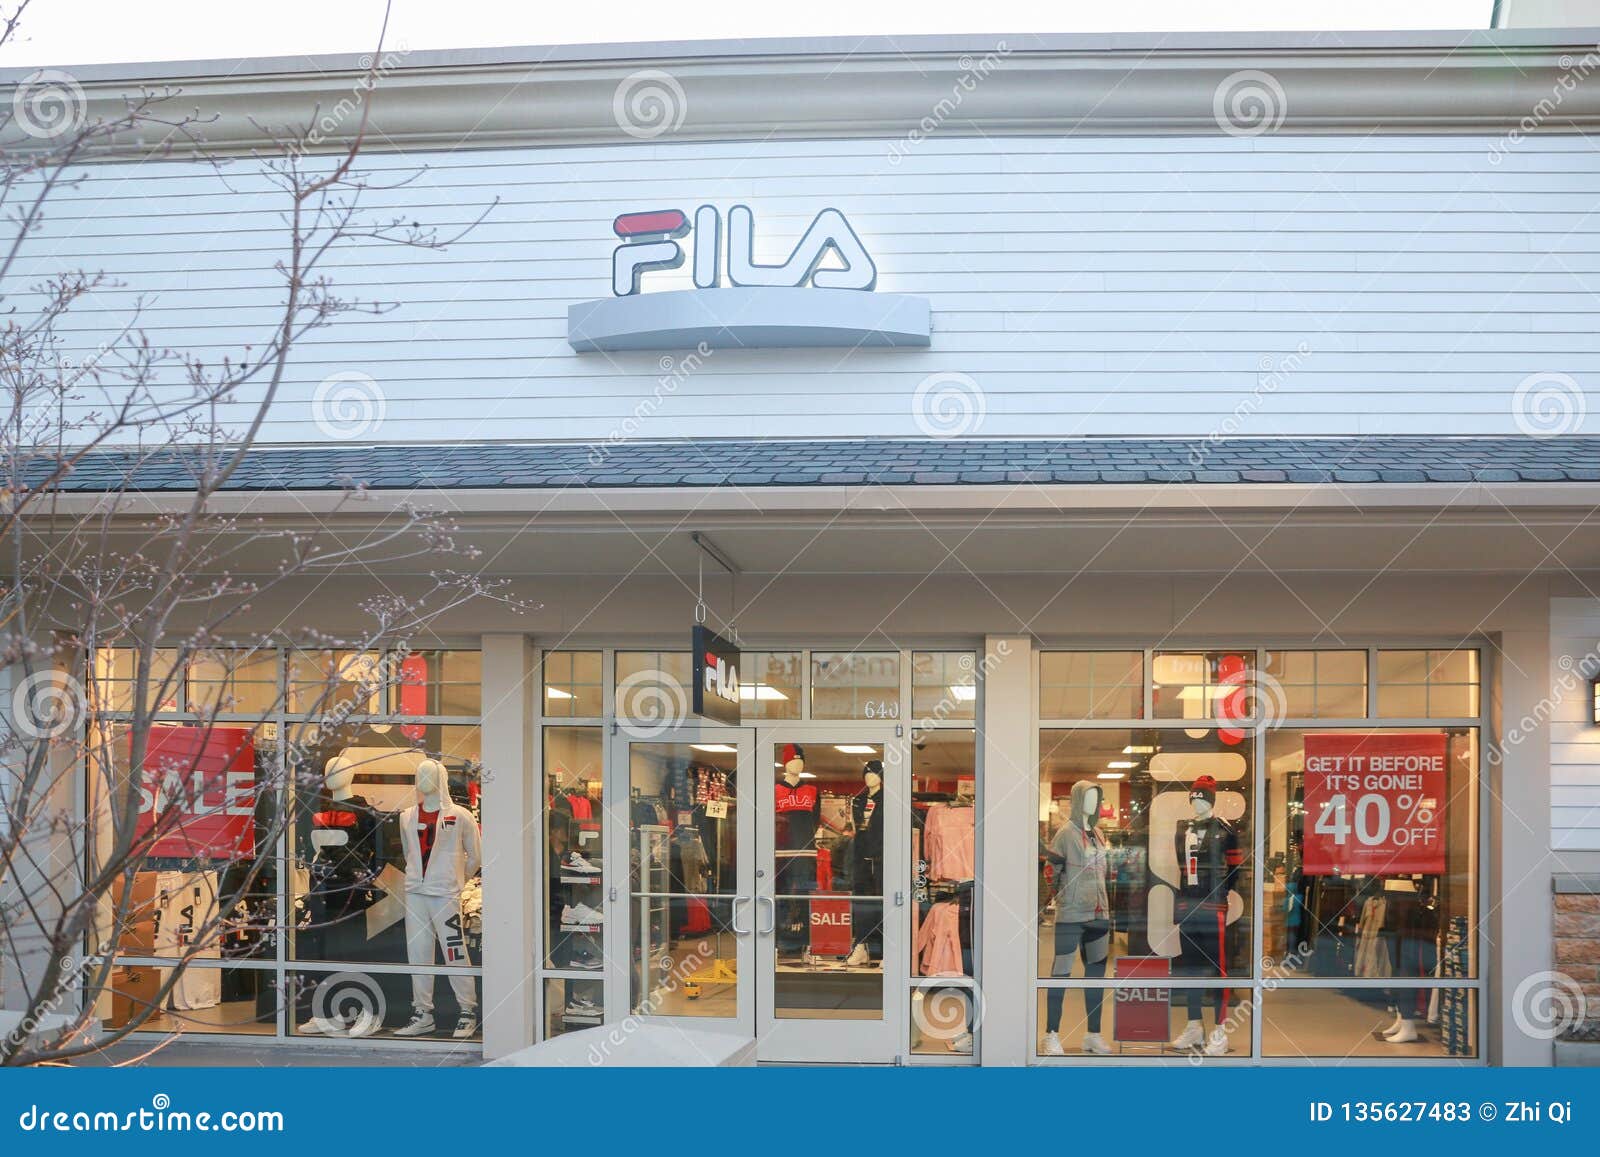 137 Fila Shop - Stock Photos from Dreamstime